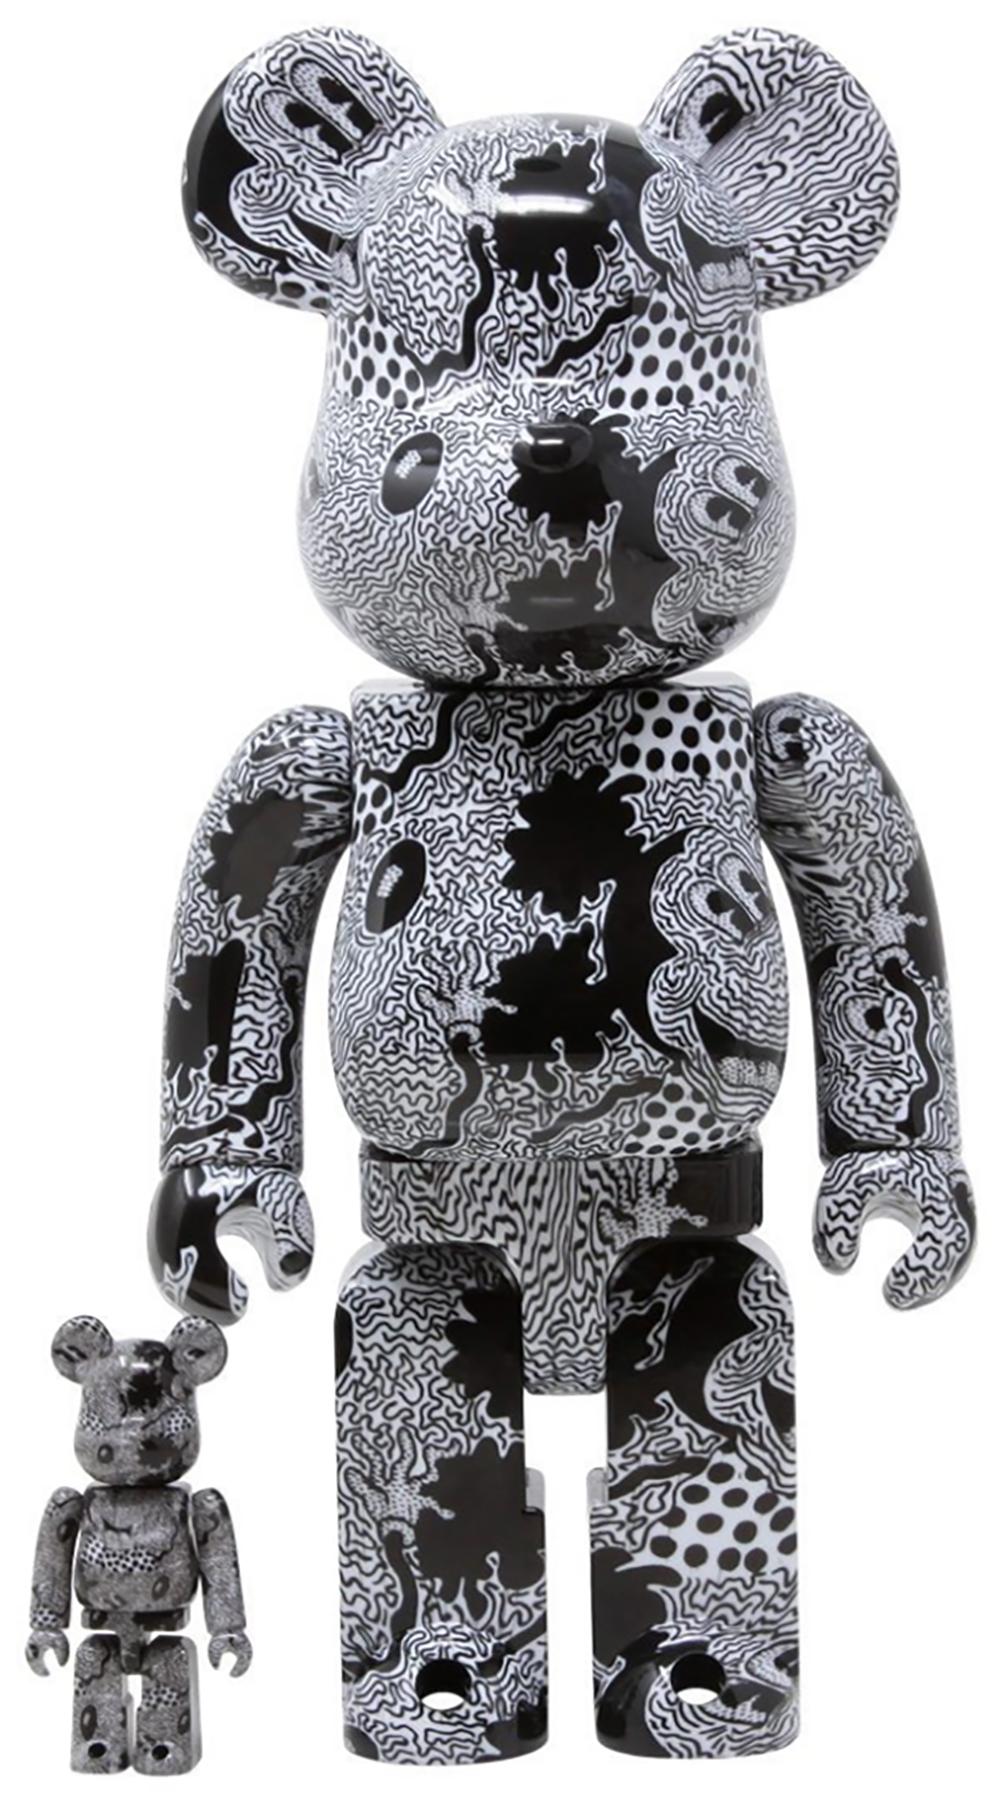 Keith Haring Bearbrick 400% figure (Haring Mickey Mouse BE@RBRICK)